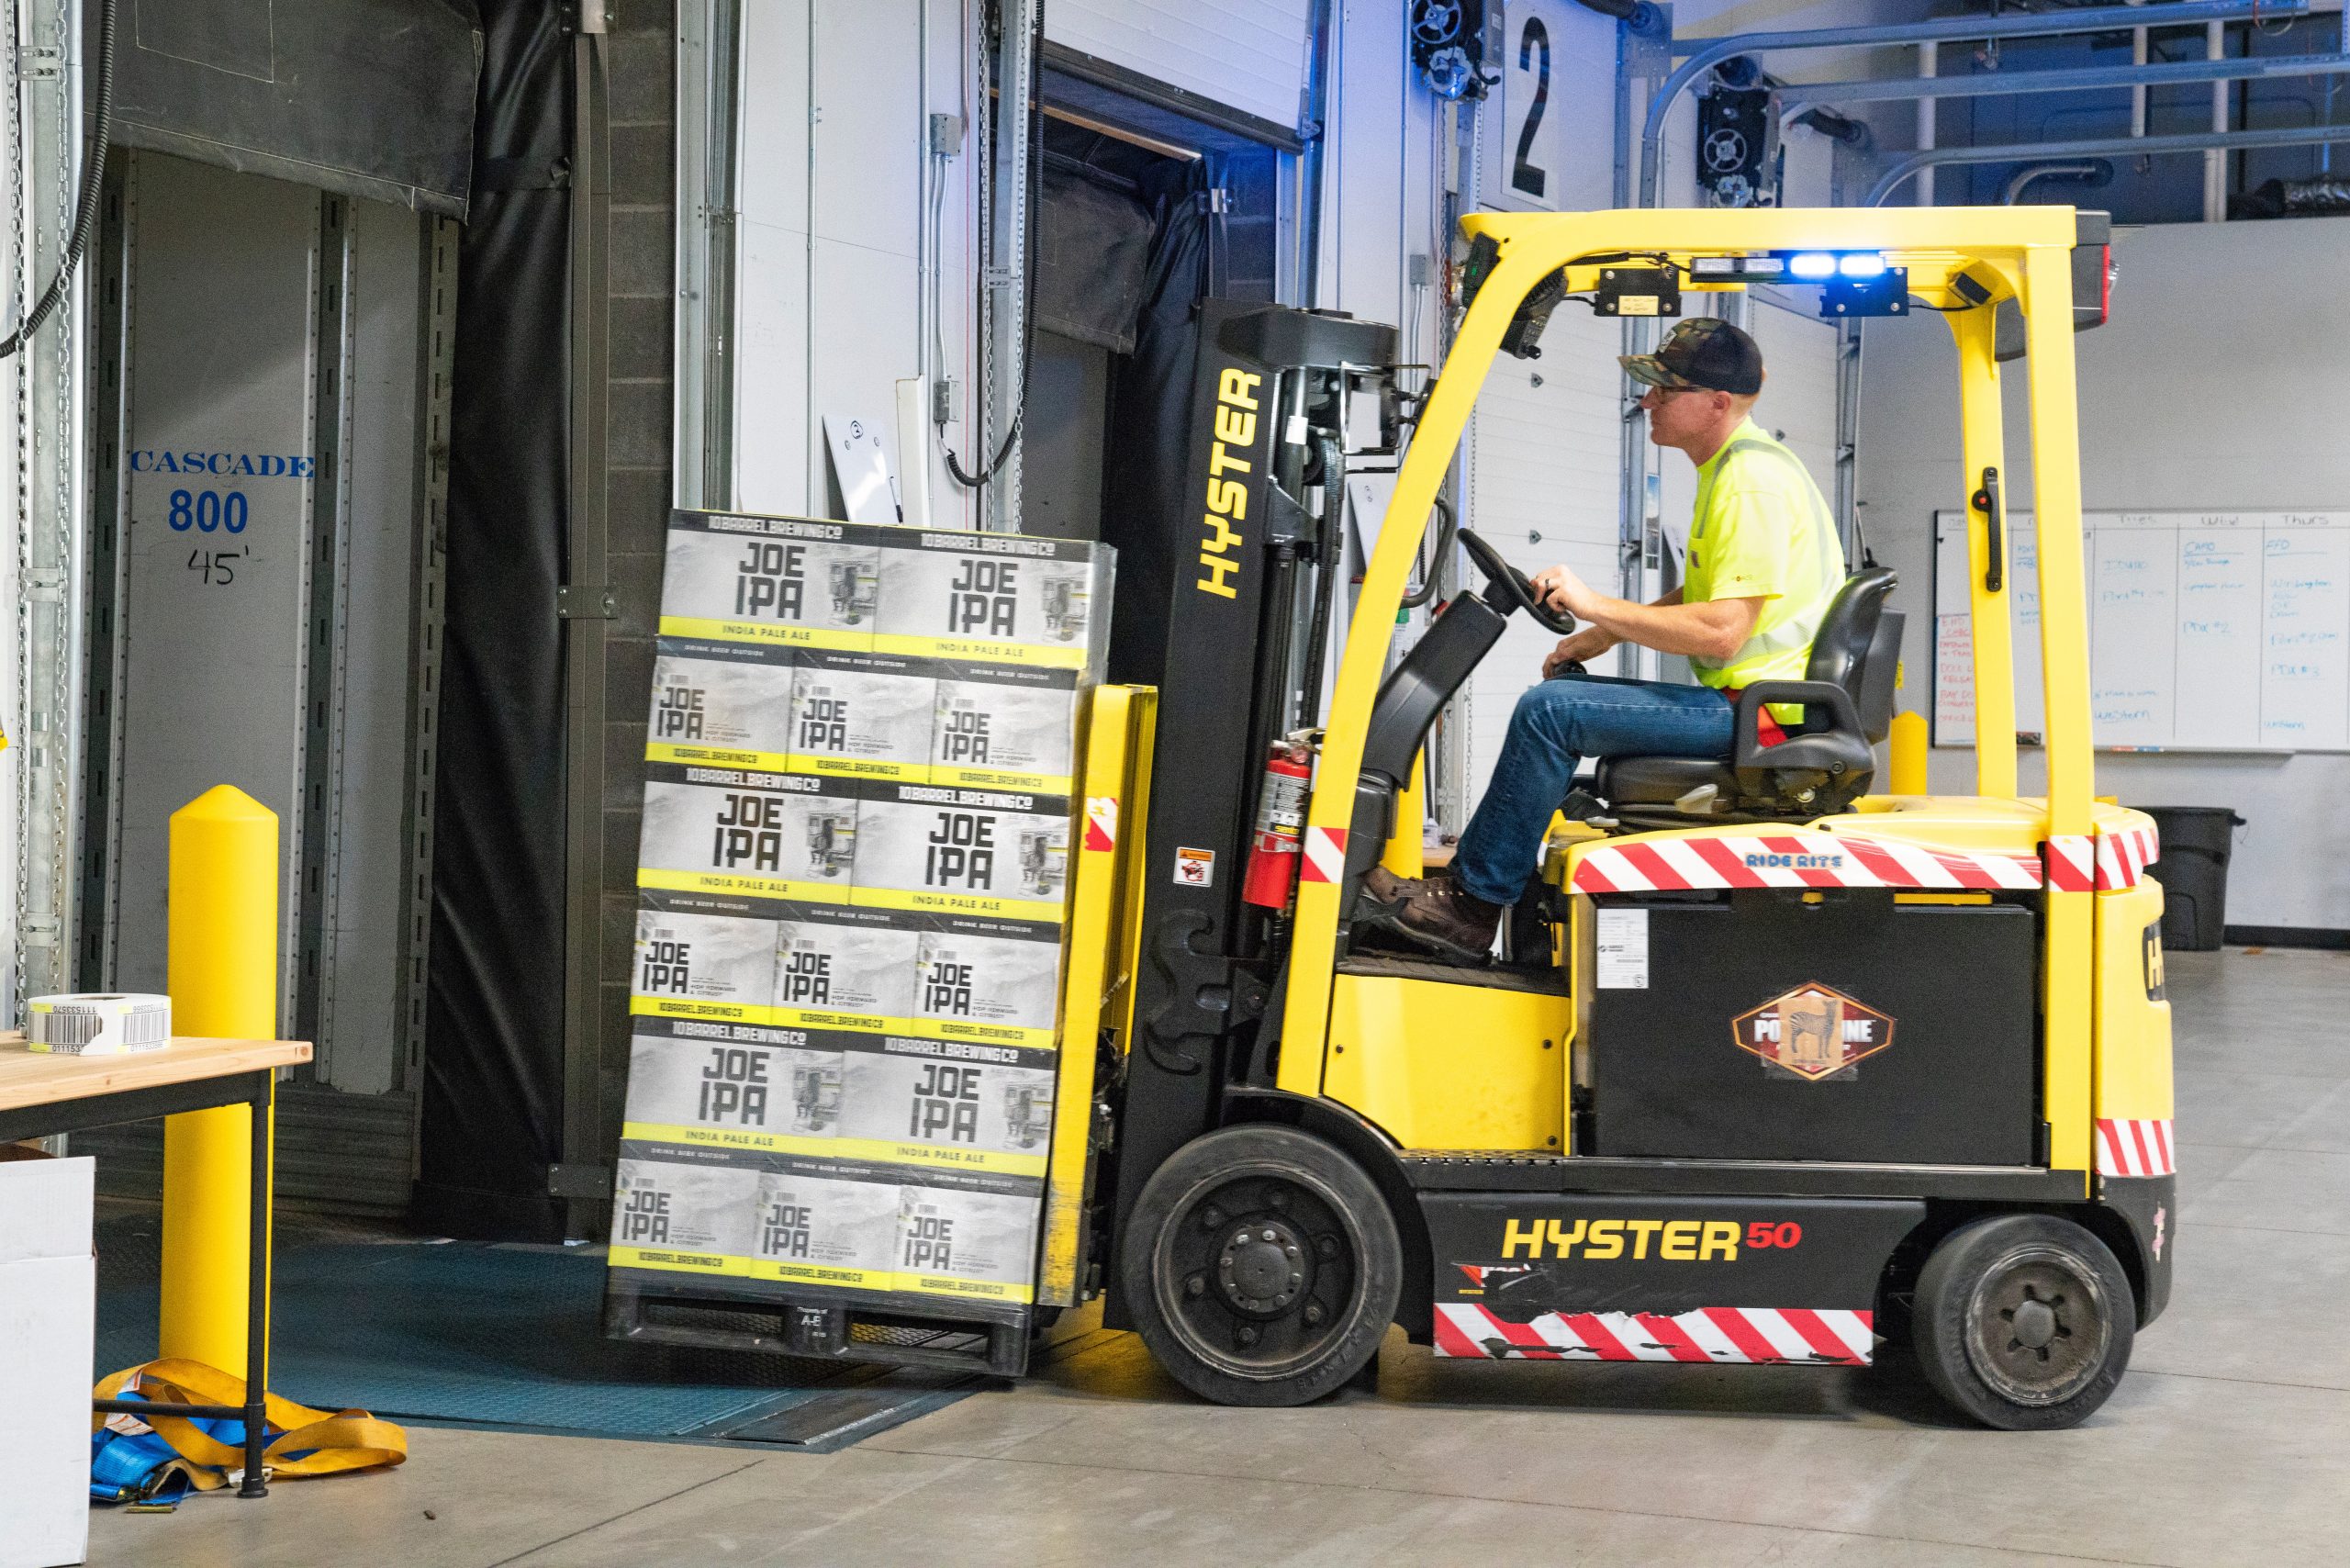 7 common uses of forklifts